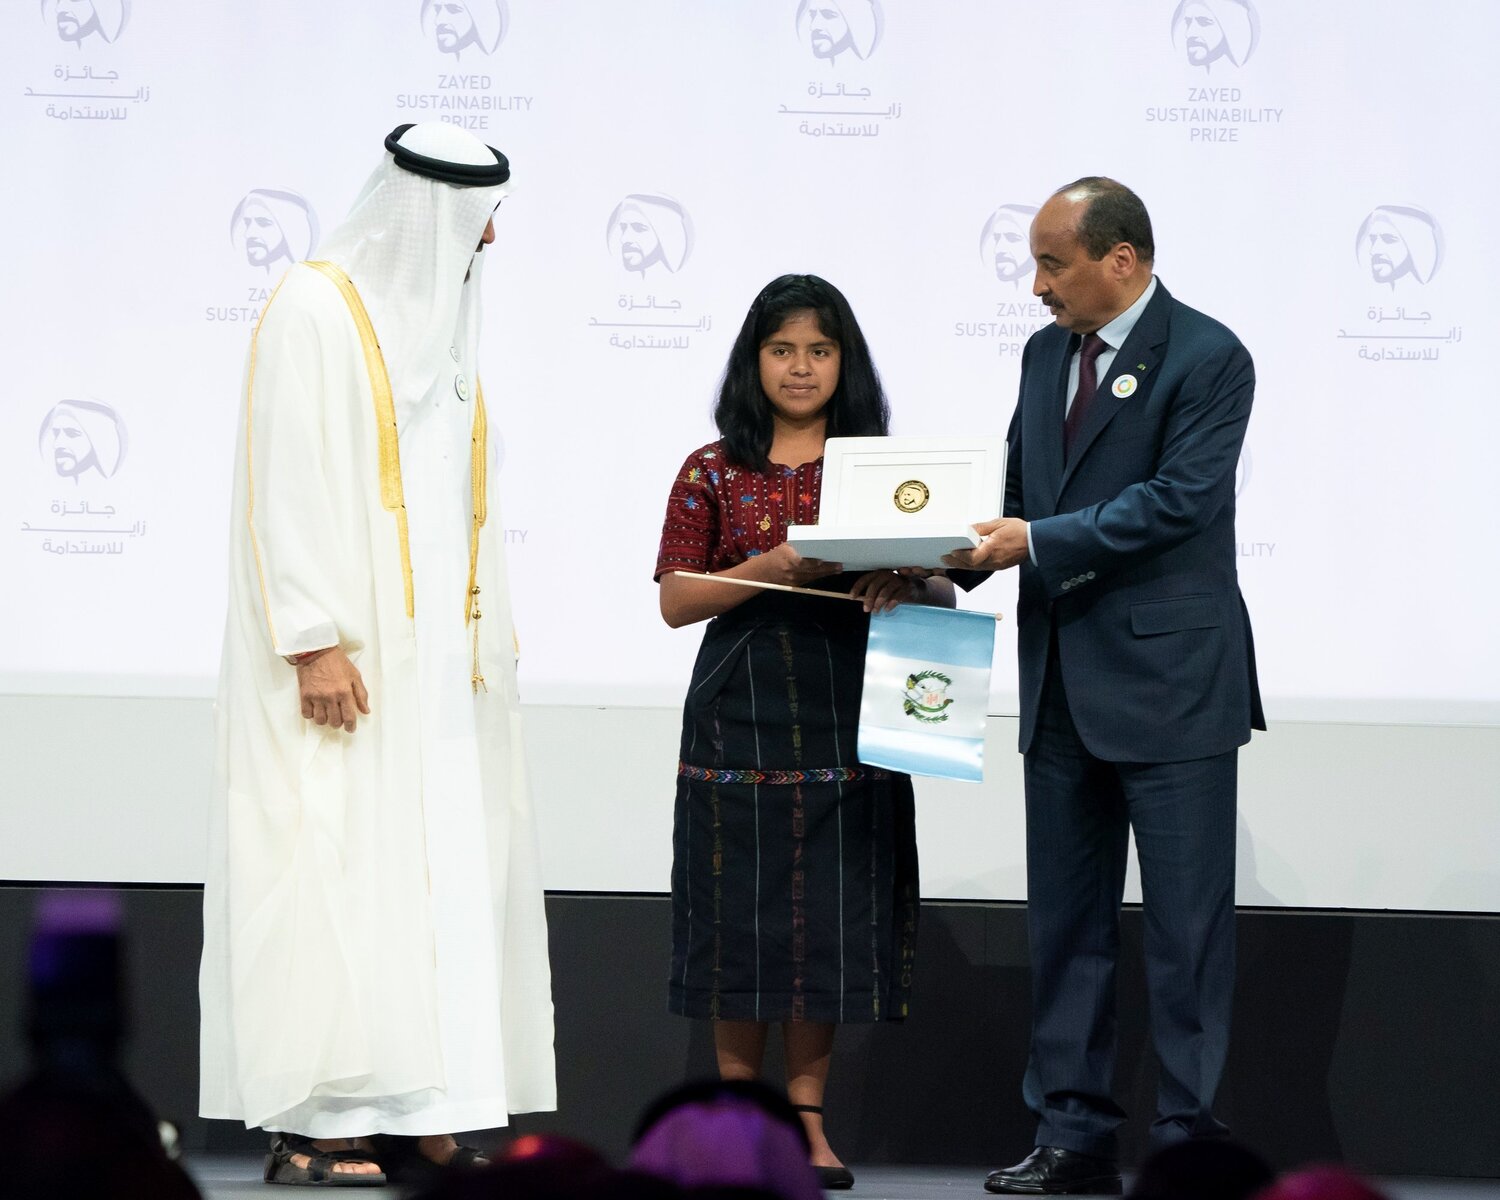 ABU DHABI, UNITED ARAB EMIRATES - January 14, 2019: HH Sheikh Mohamed bin Zayed Al Nahyan, Crown Prince of Abu Dhabi and Deputy Supreme Commander of the UAE Armed Forces (L) and HE Mohamed Ould Abdel Aziz, President of Mauritania (R), present an award to a representative from The Impact School, Guatemala, winners of the Global High Schools Prize, Americas region.
( Hamed Al Mansoori / Ministry of Presidential Affairs )
---